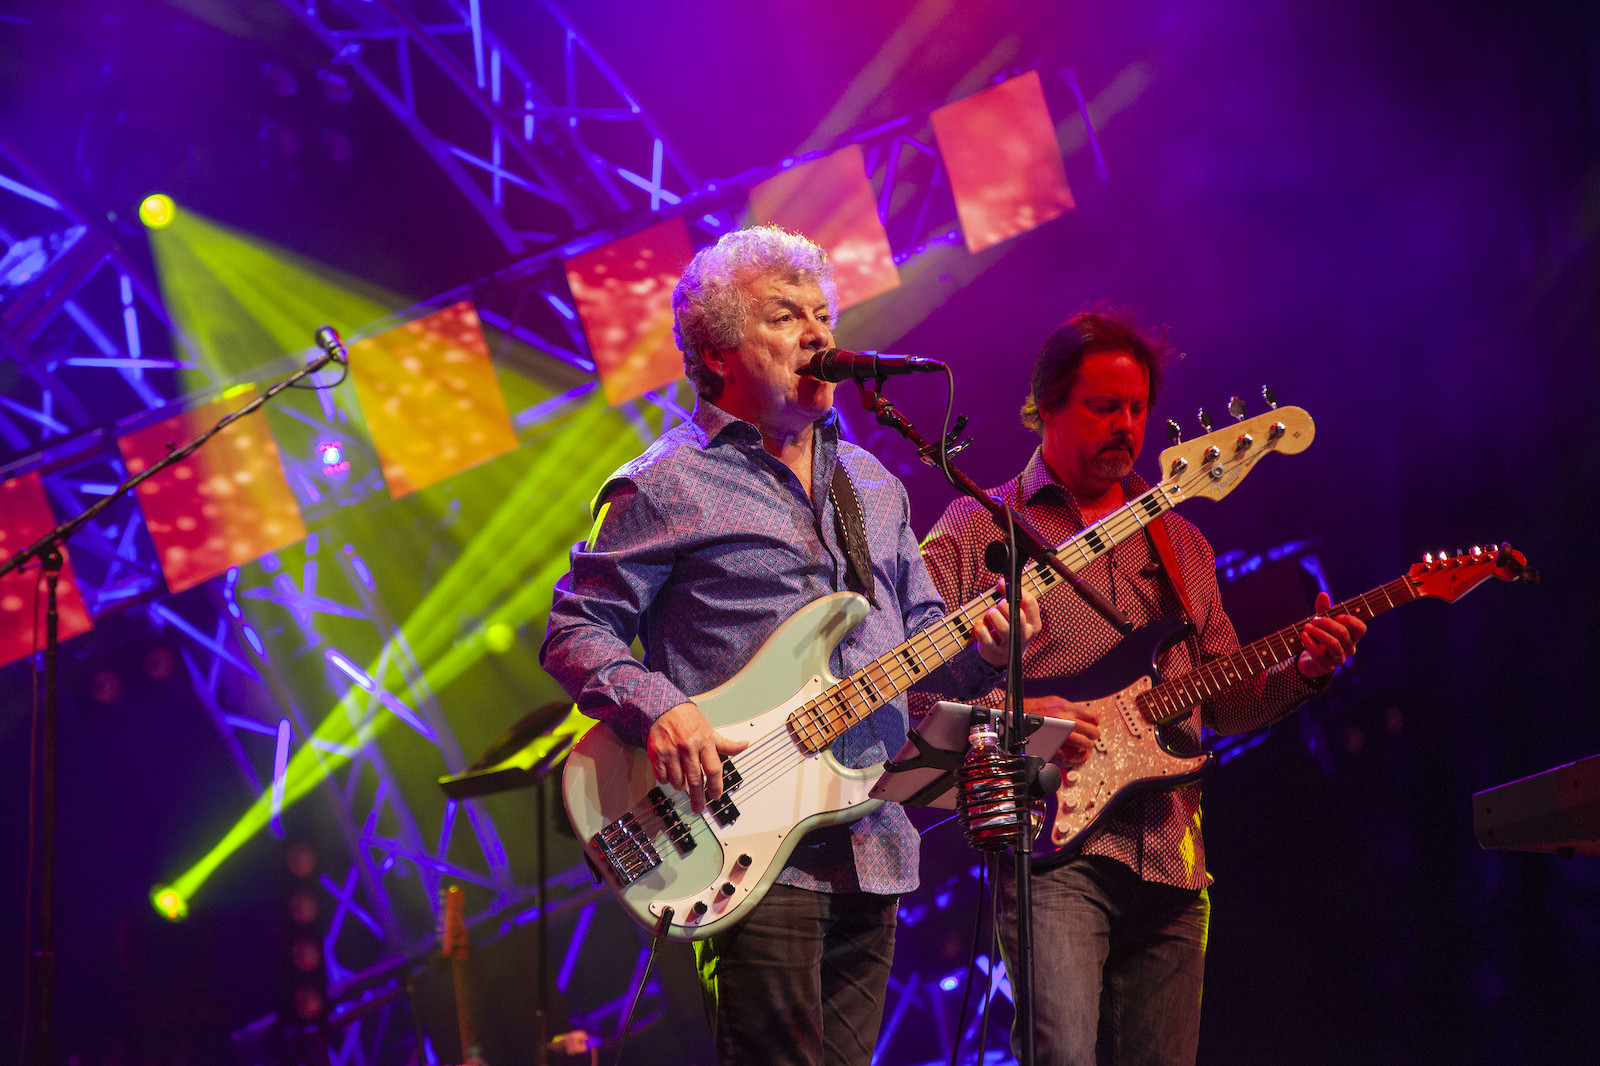 Ambrosia playing the Garden Rocks concert series at the American Gardens Theater in World Showcase during the 2019 Epcot International Flower and Garden Festival. (Image Credit - Steven Miller)